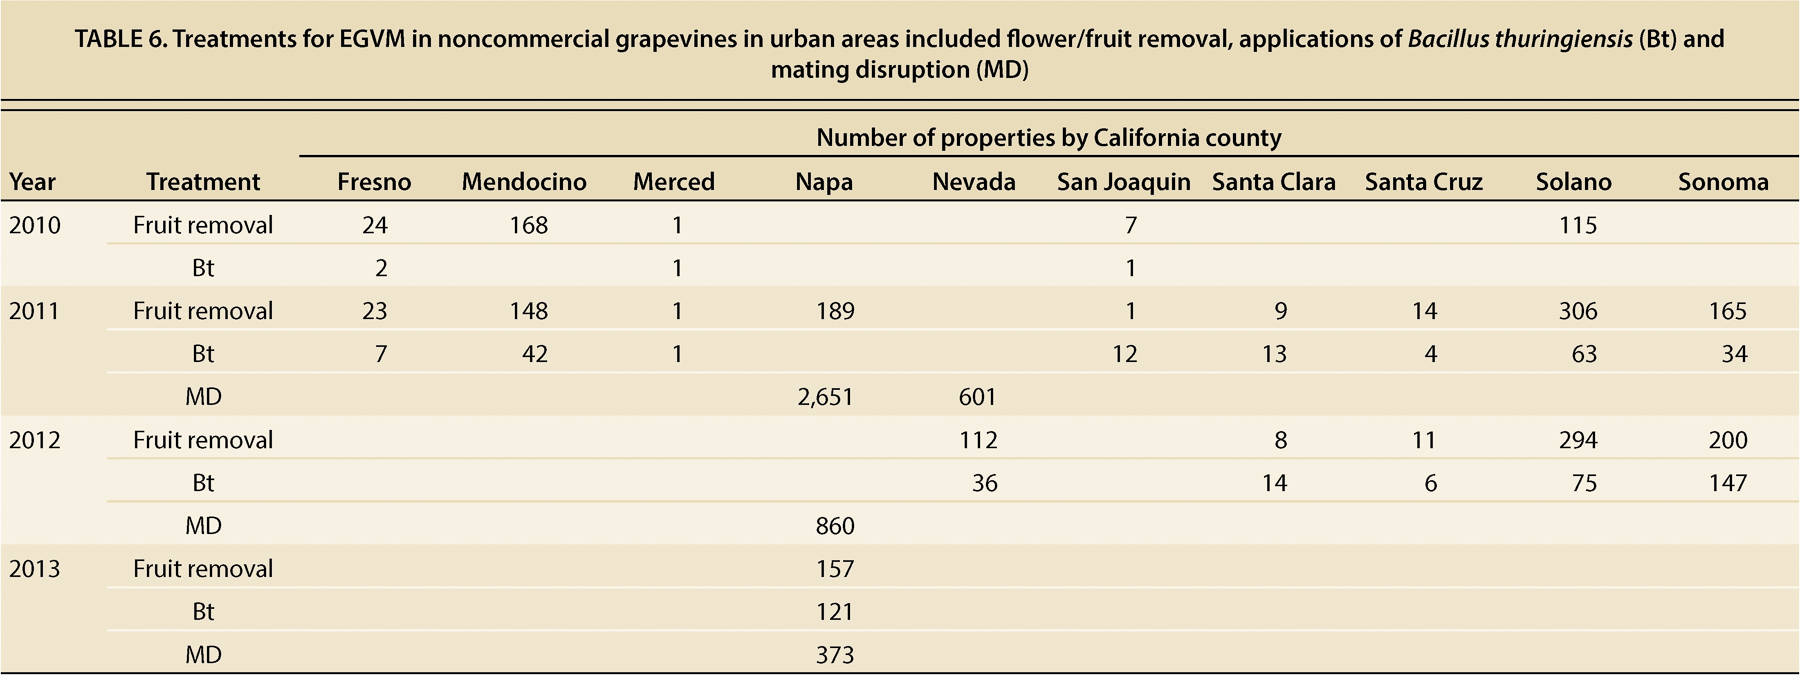 Treatments for EGVM in noncommercial grapevines in urban areas included flower/fruit removal, applications of Bacillus thuringiensis (Bt) and mating disruption (MD)